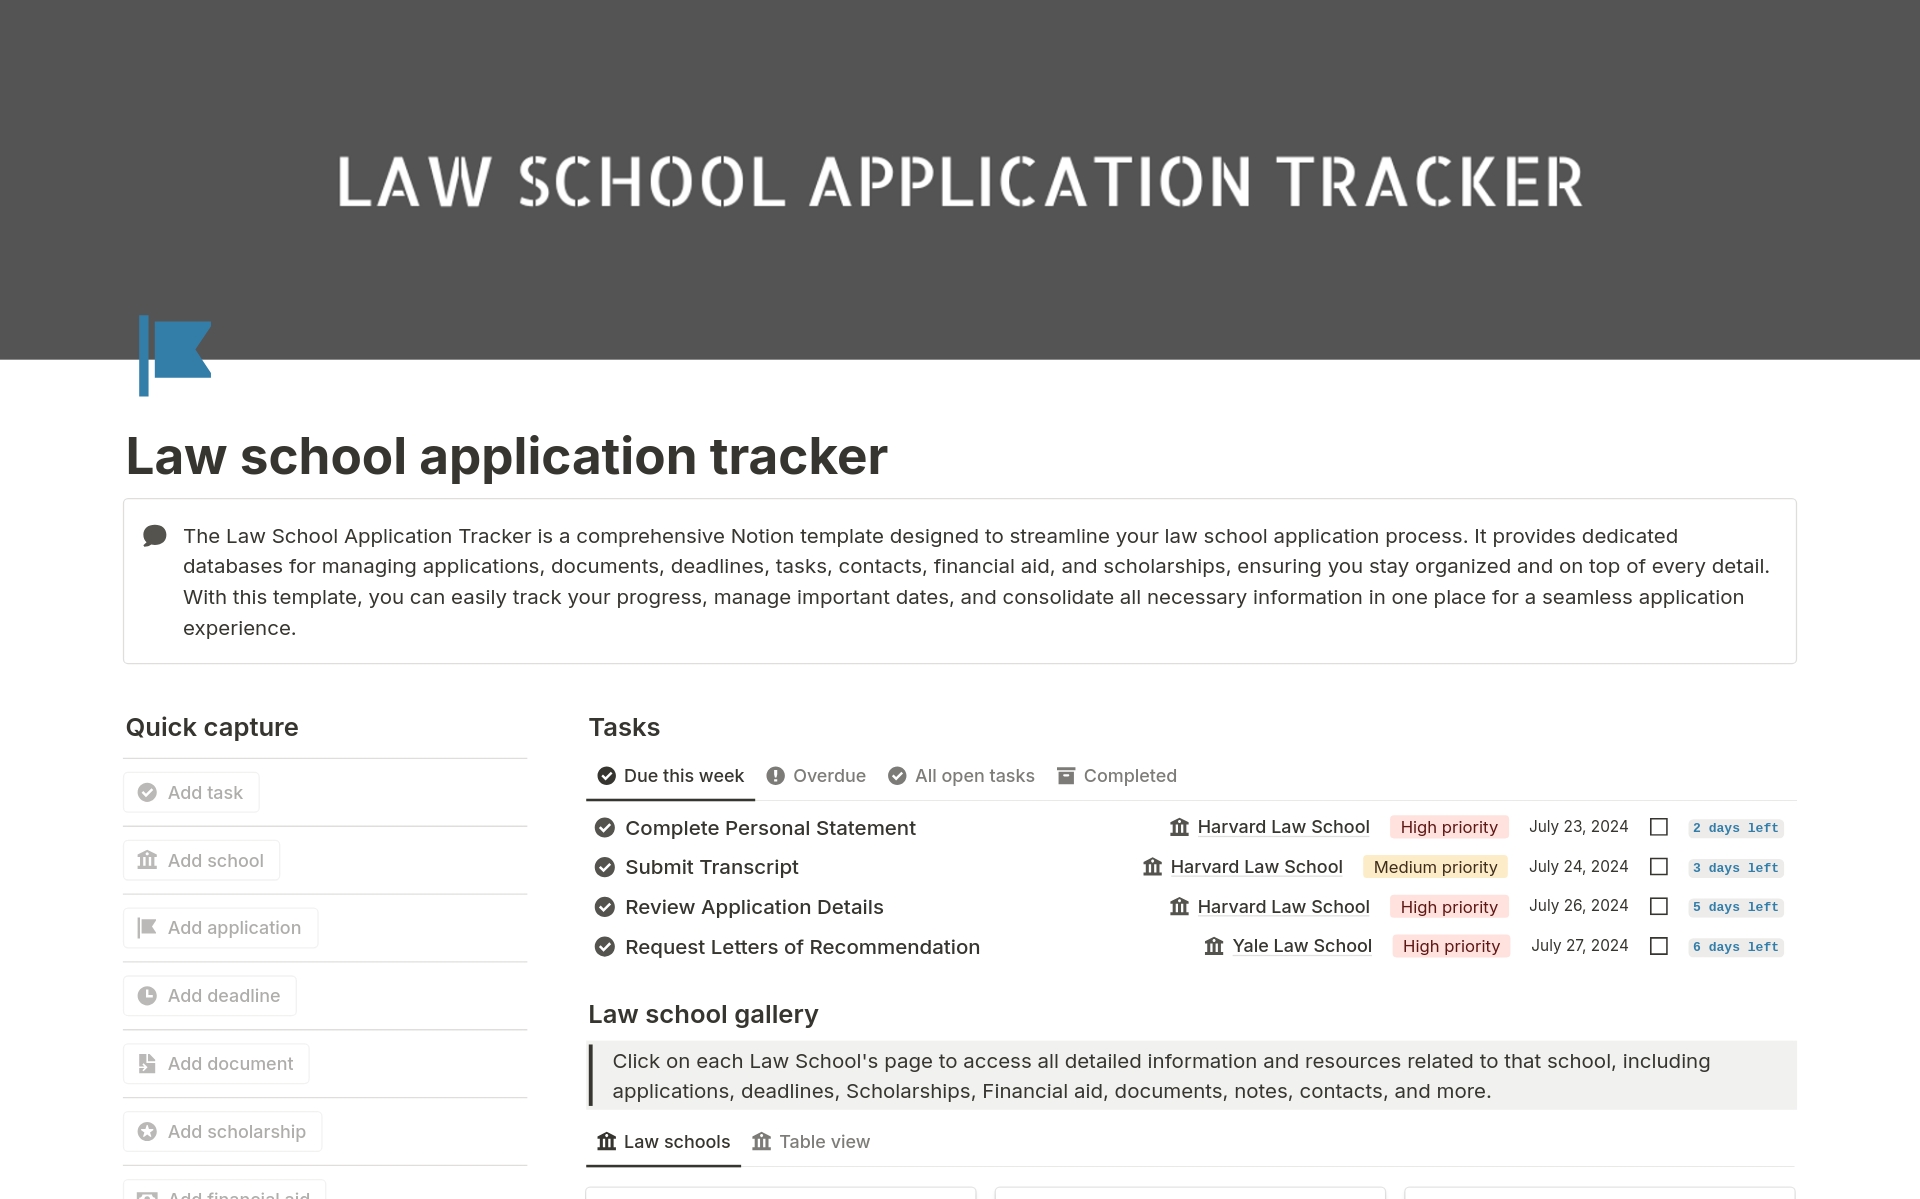 The Law School Application Tracker is a comprehensive Notion template designed to streamline your law school application process. 